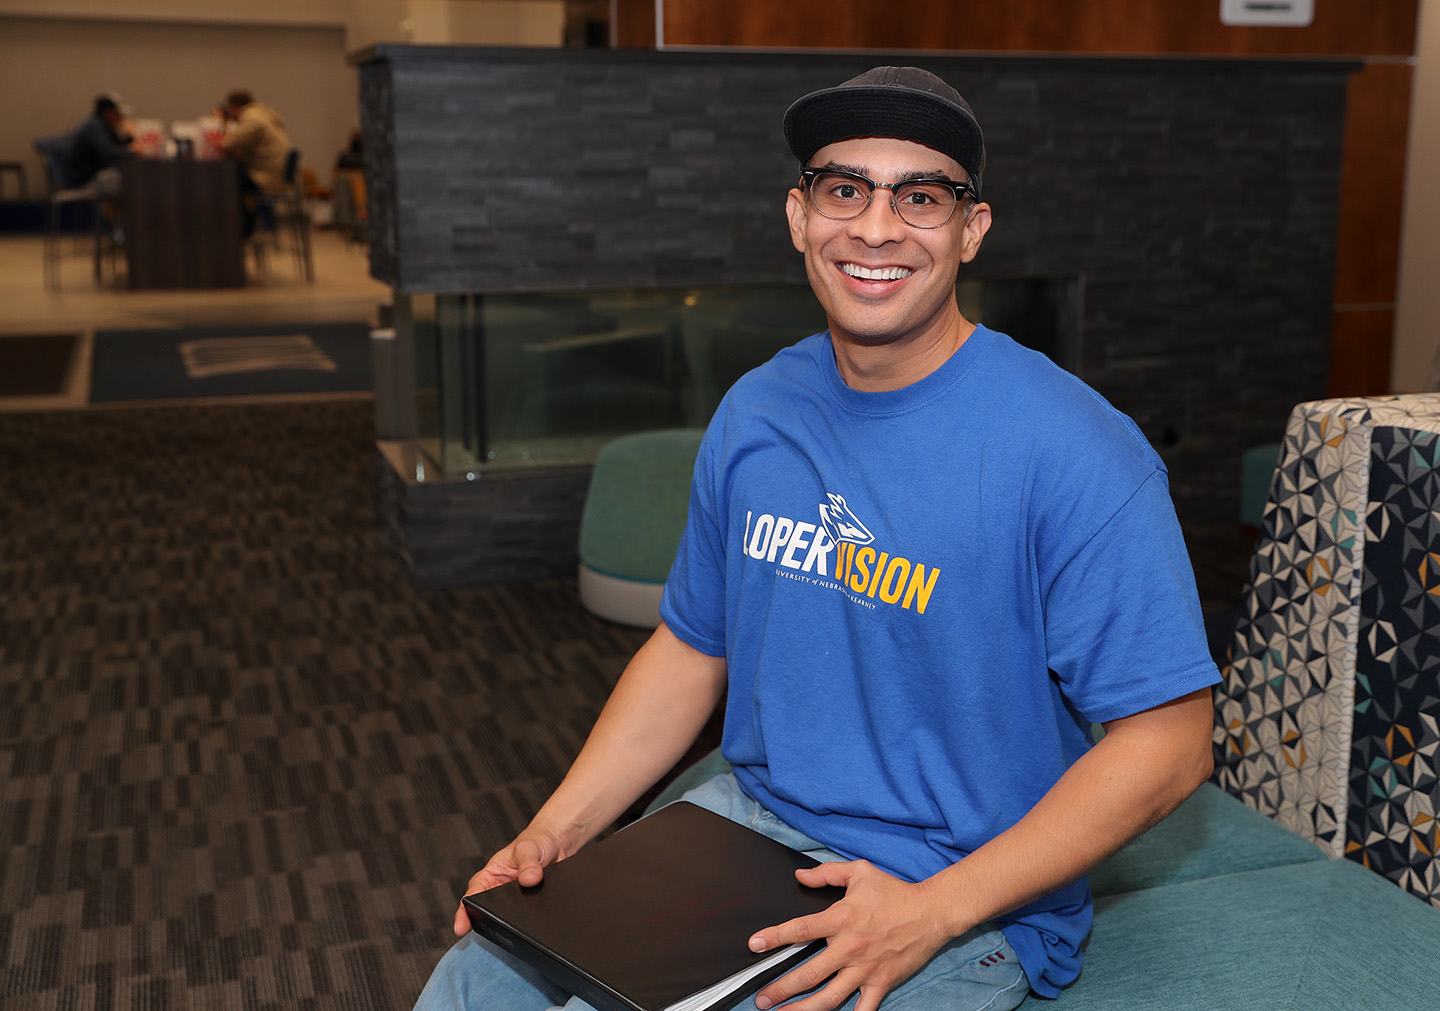 Francisco Cantillo came to UNK in 2011 to learn English. Now, he’s back on campus pursuing a bachelor’s degree in chemistry. (Photos by Erika Pritchard, UNK Communications)